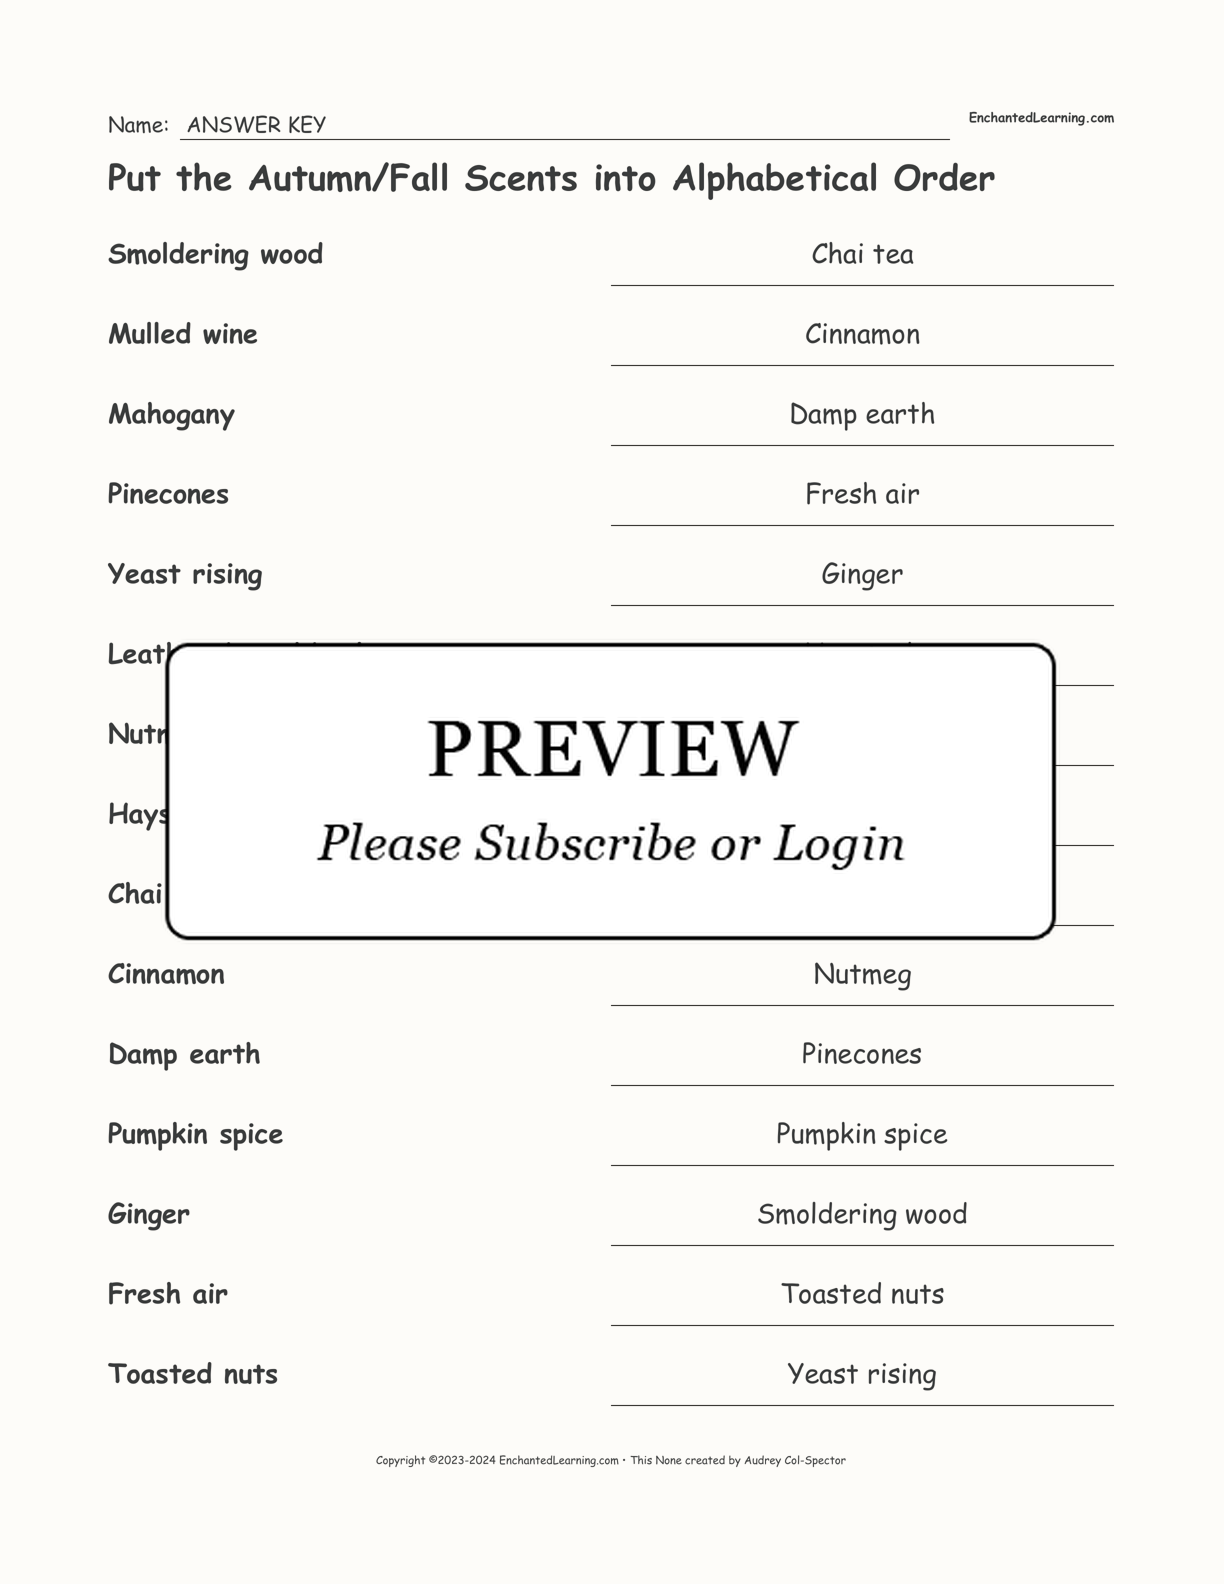 Put the Autumn/Fall Scents into Alphabetical Order interactive worksheet page 2